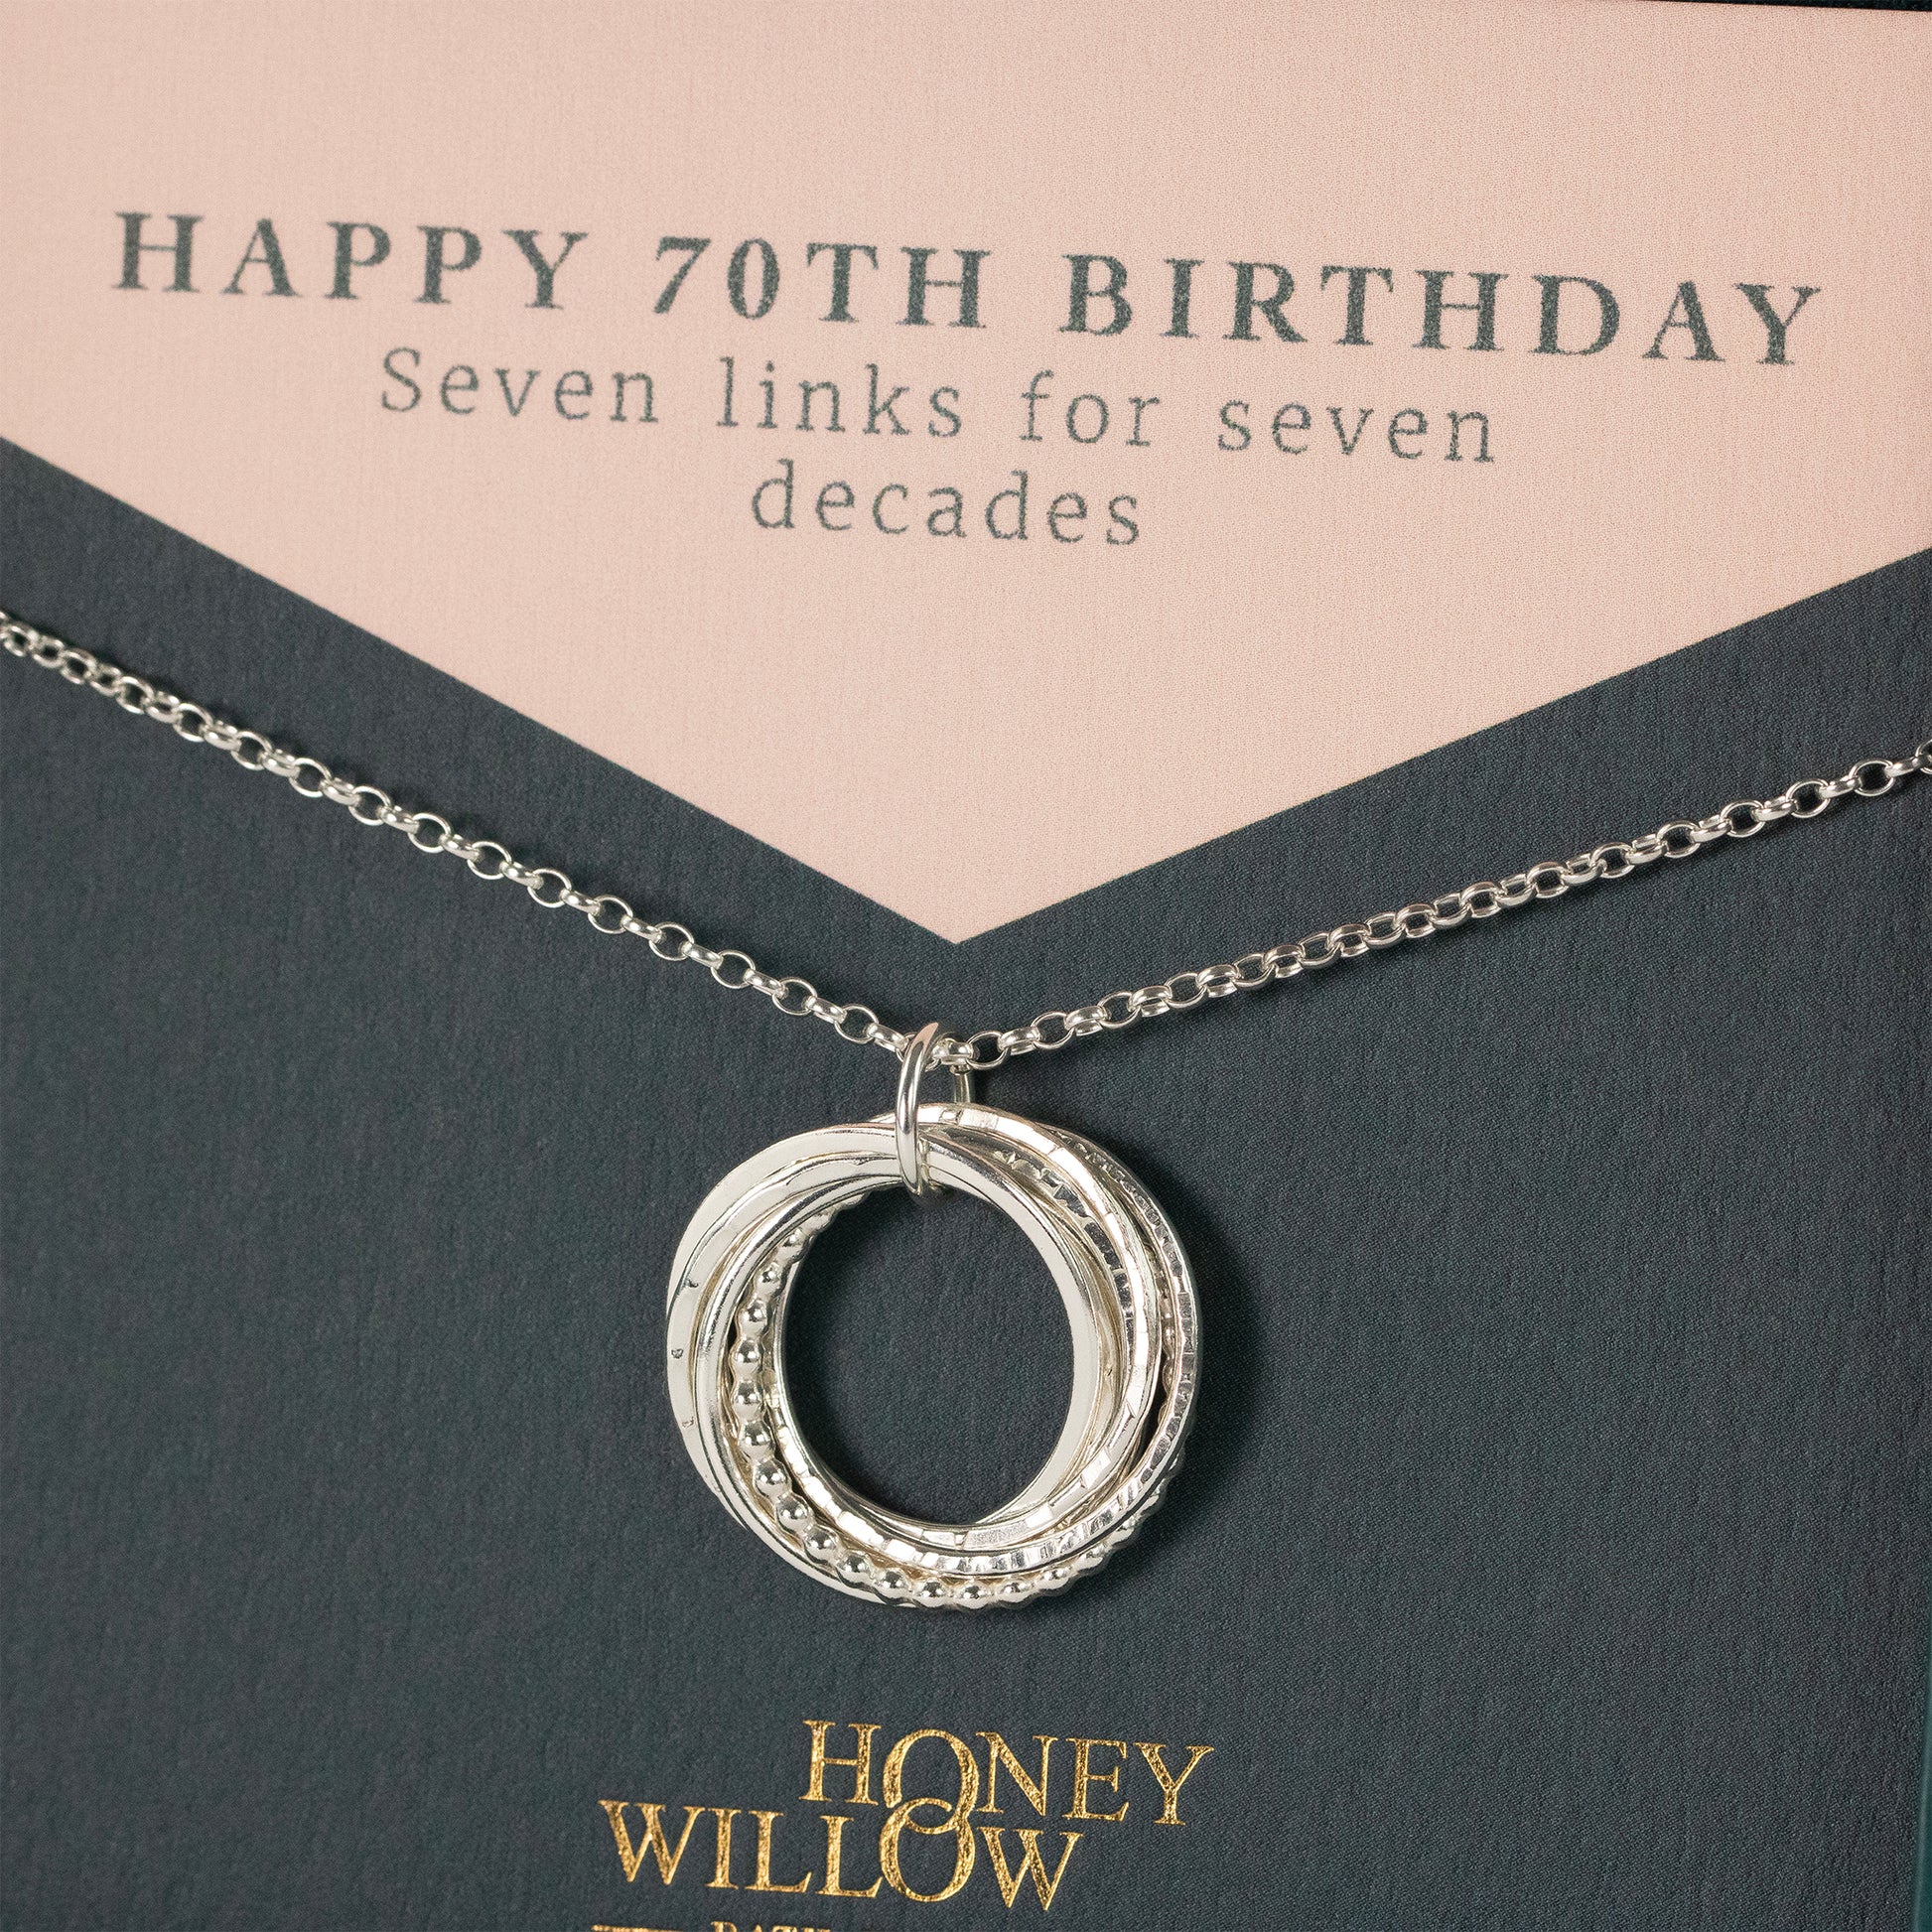 70th Birthday Necklace - The Original 7 Links for 7 Decades Necklace - Silver